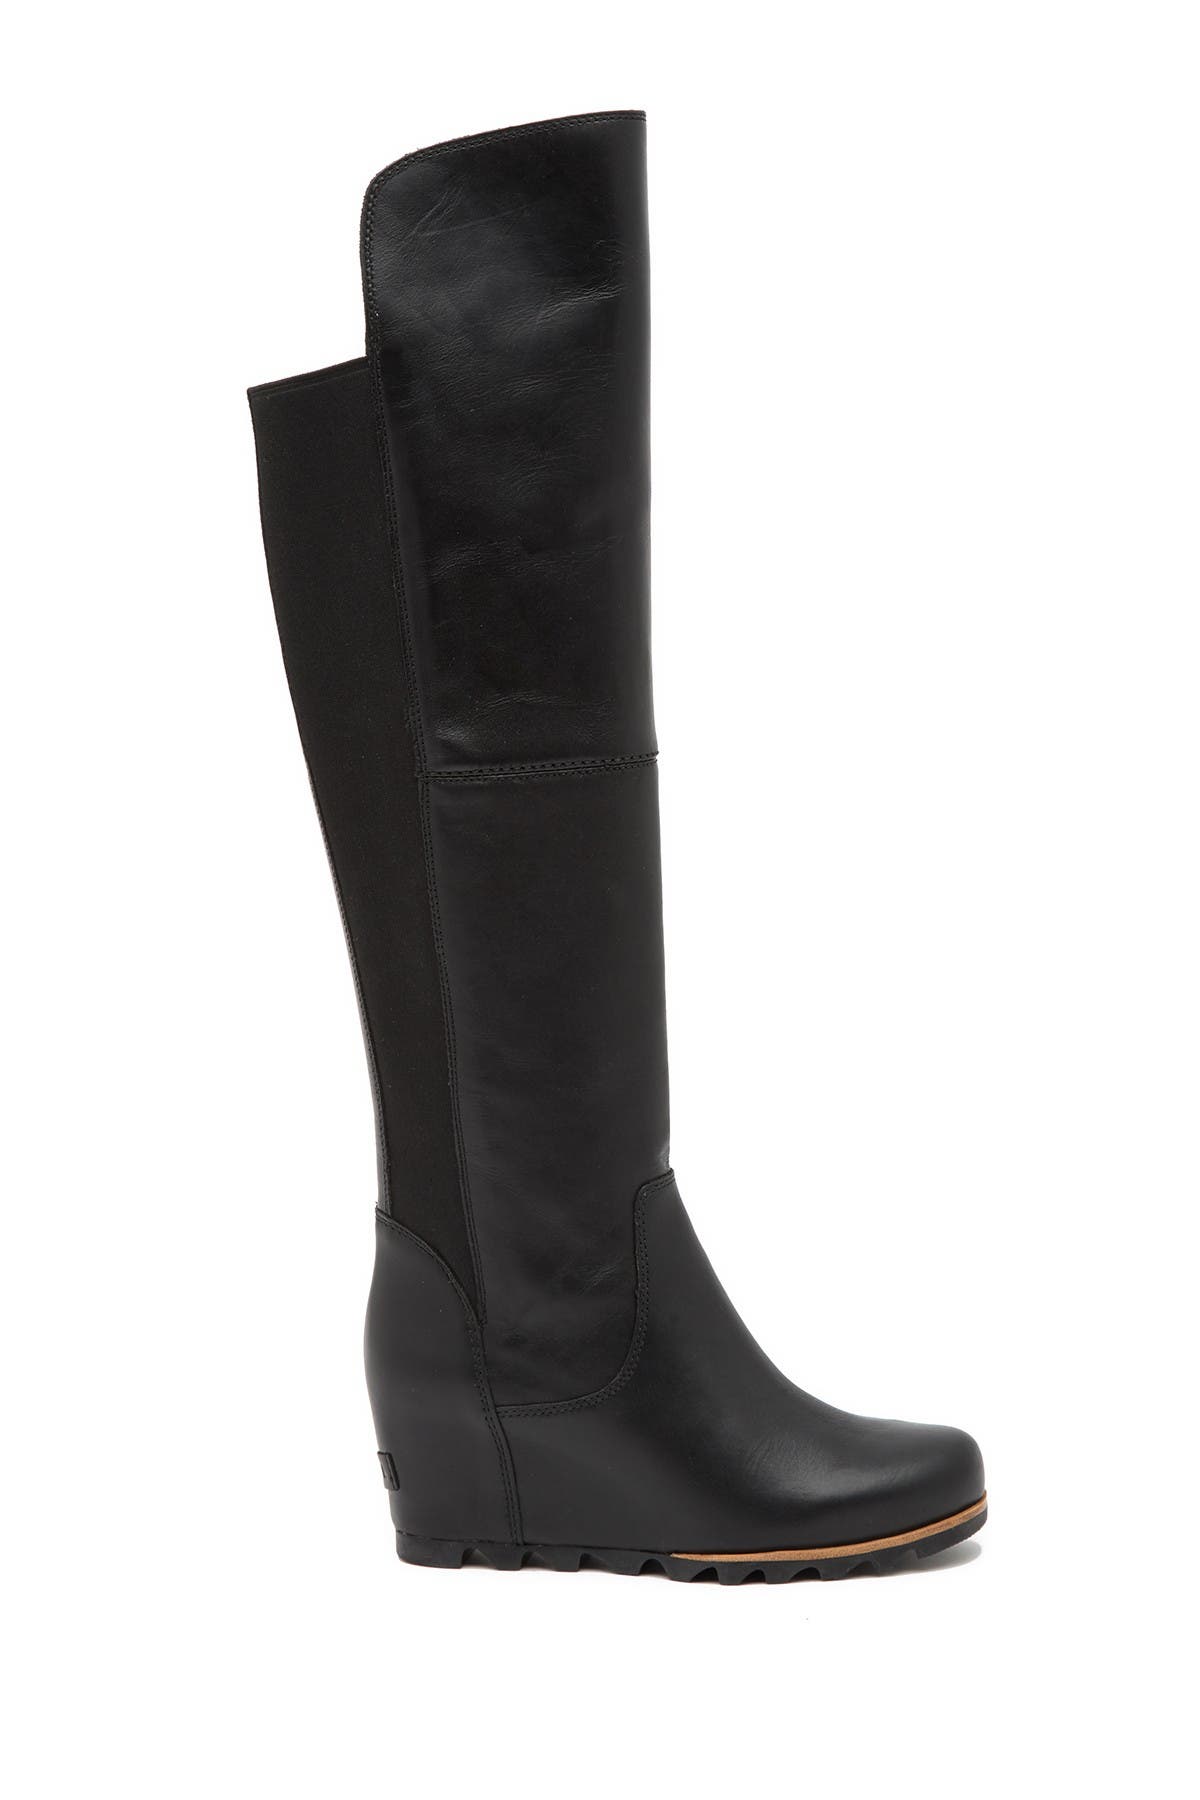 the-Knee Lux Waterproof Leather Boot 